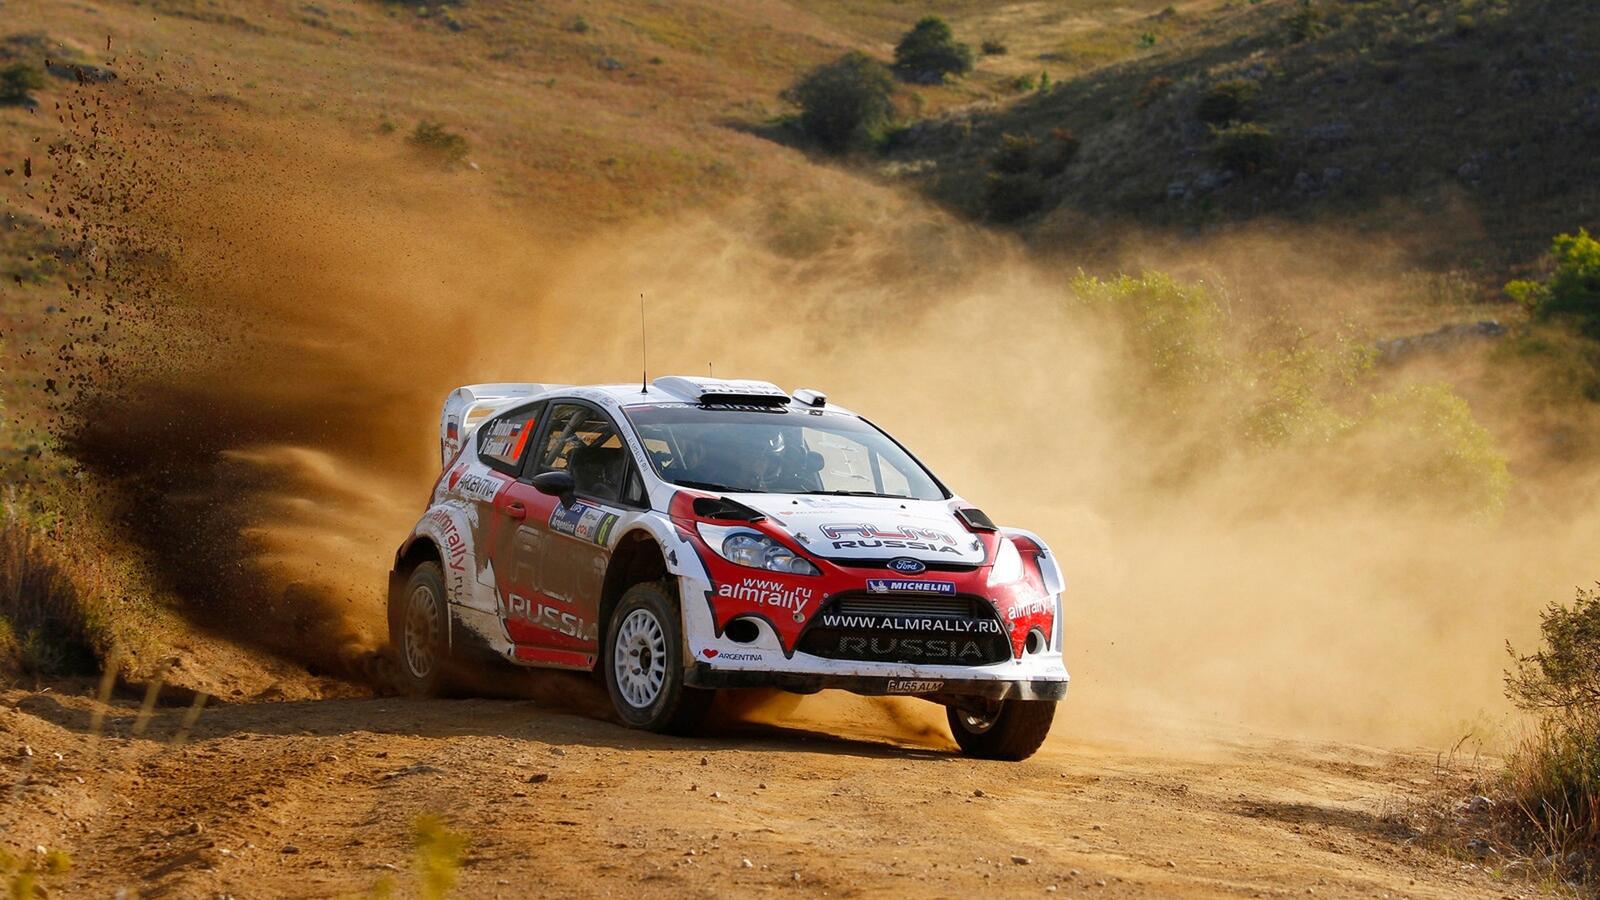 Wallpapers Ford Focus Rally Track on the desktop